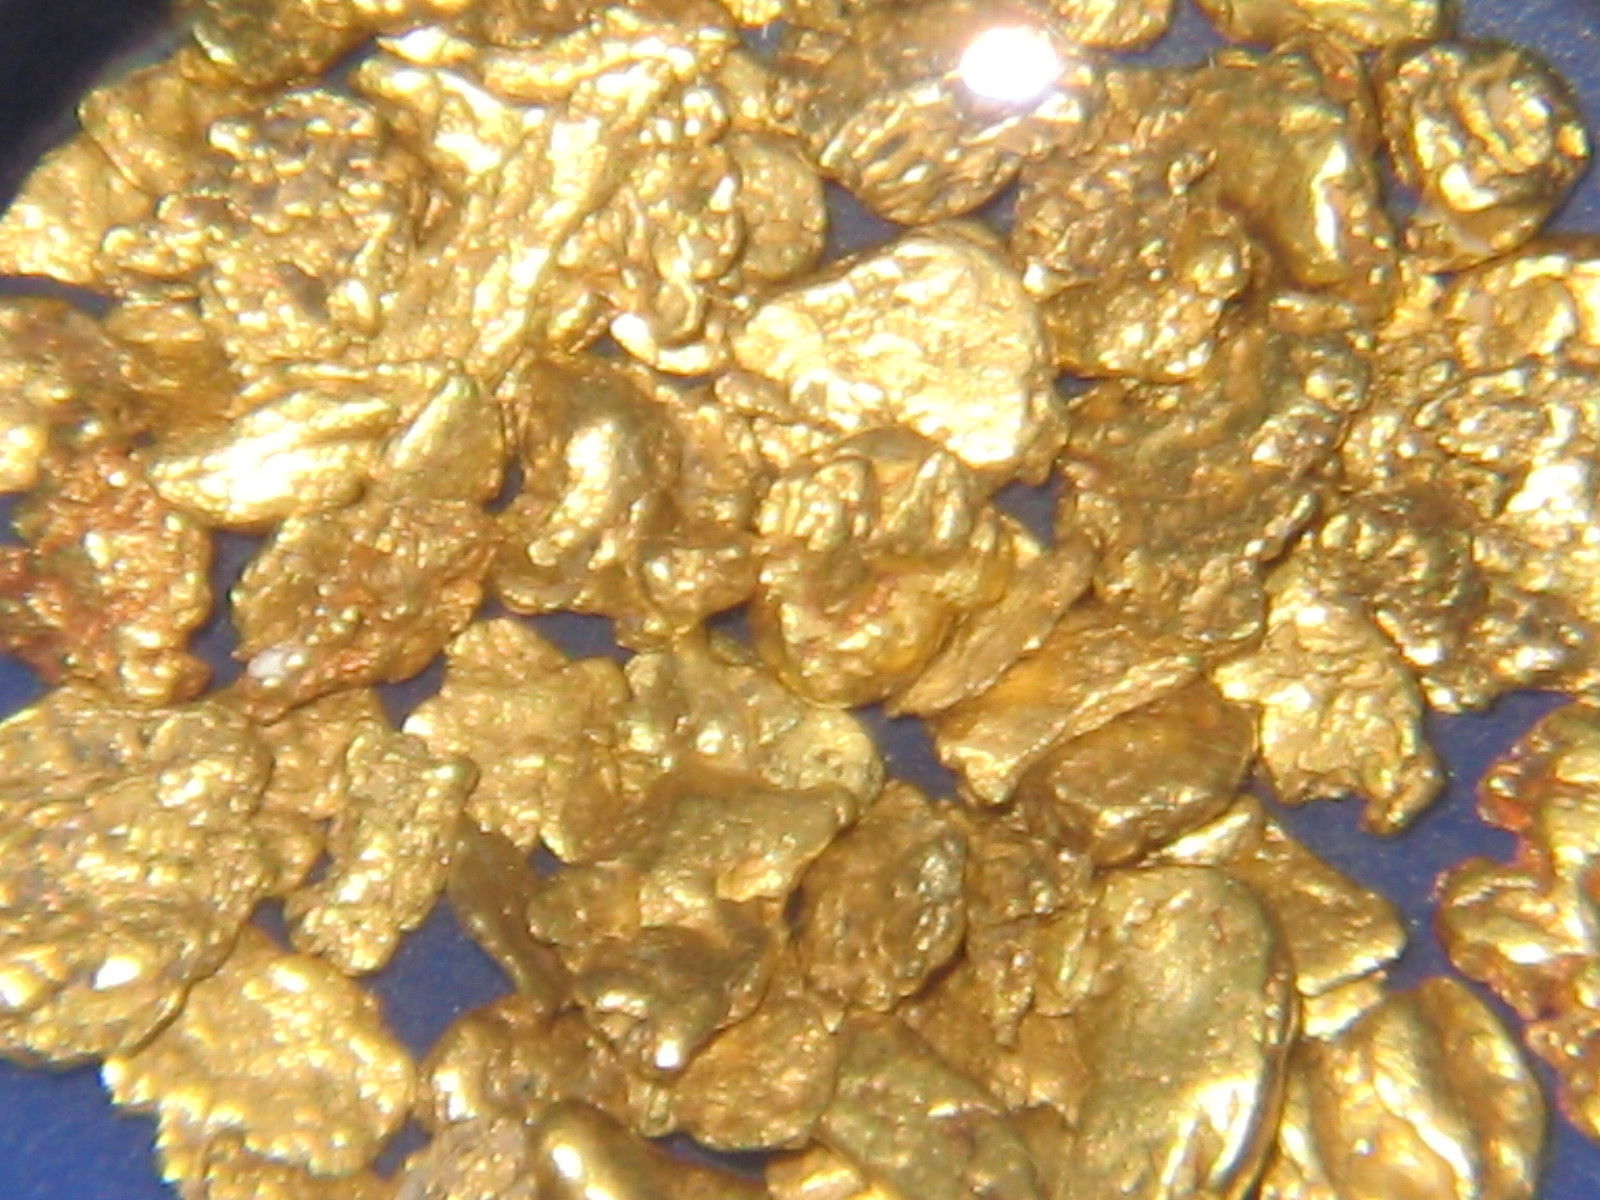 Gold Paydirt 2.5 Lbs Unsearched Georgia Pay Dirt Guaranteed Gold FREE Glass  Vial Gold Pickers Sluiceboy Prosecting -  Israel